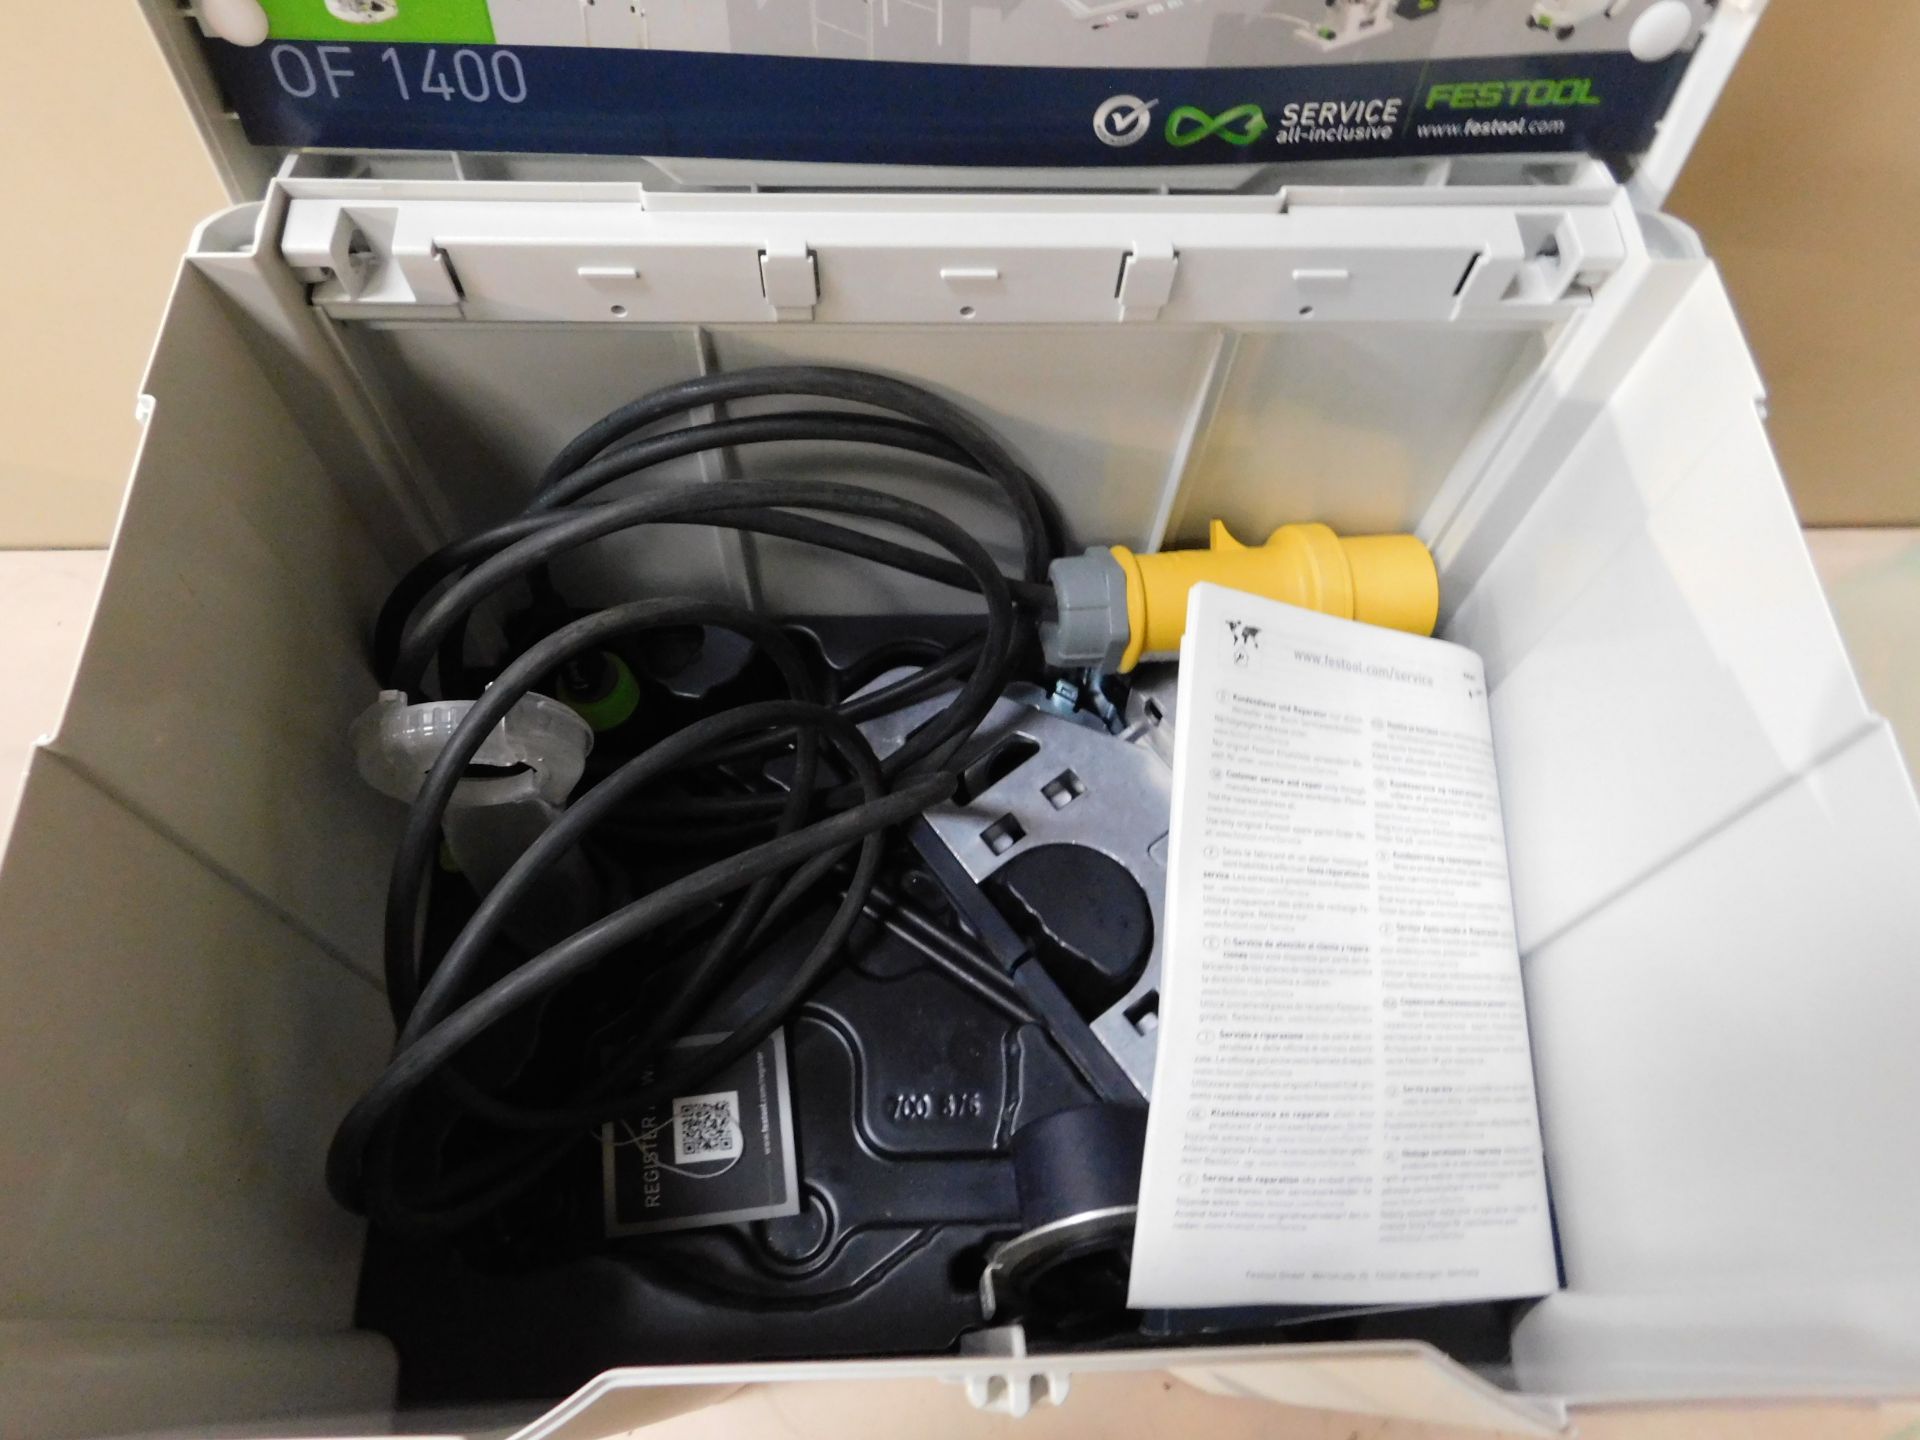 Festool OF1400 EQ Plus GB Router, 110v with Guide & Power Lead - Image 3 of 3